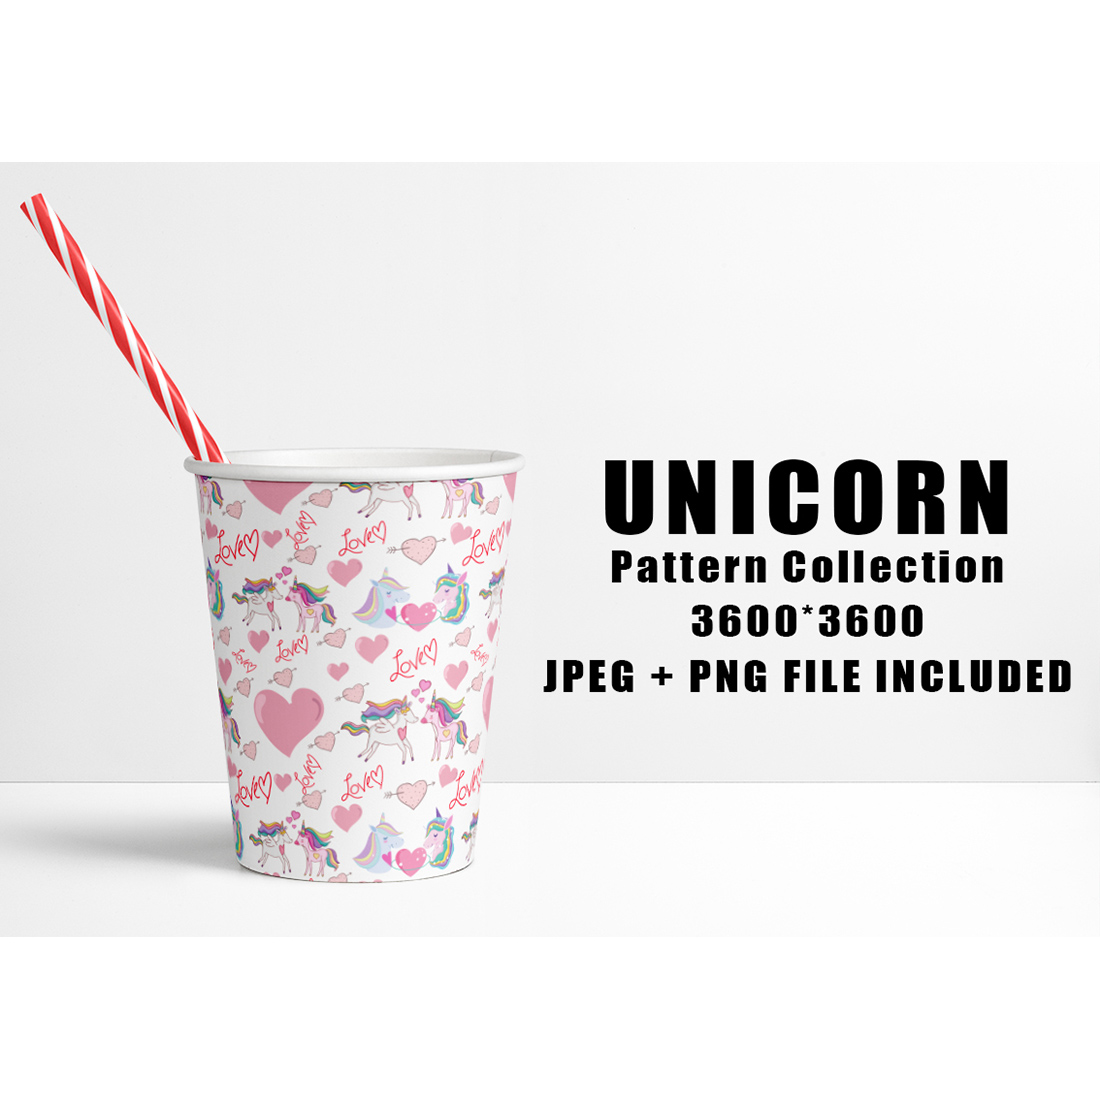 Image of a paper cup with wonderful patterns with unicorns